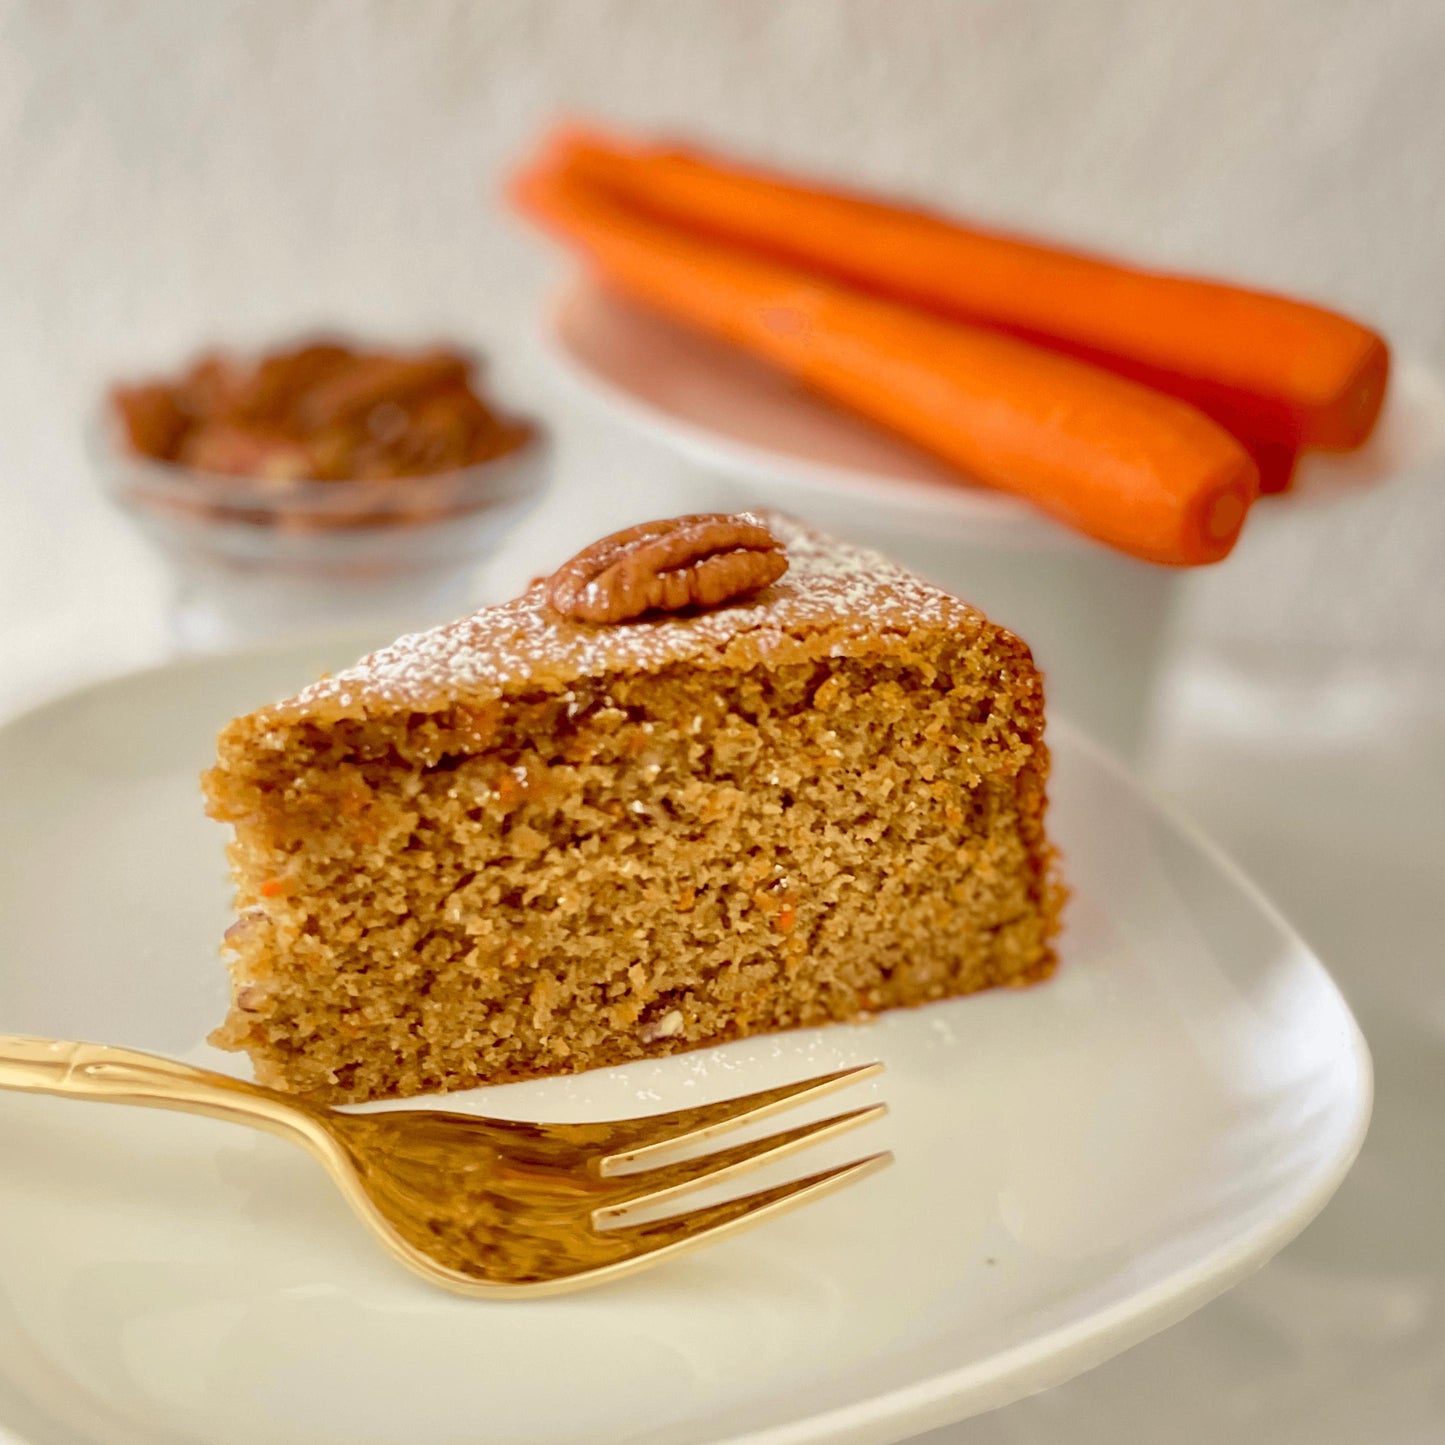 Healthy Carrot Pecan cake, dairy, gluten and sugar-free, topped with caramel and toasted pecans, a guilt-free indulgence. Full Life Gourmet Bakery